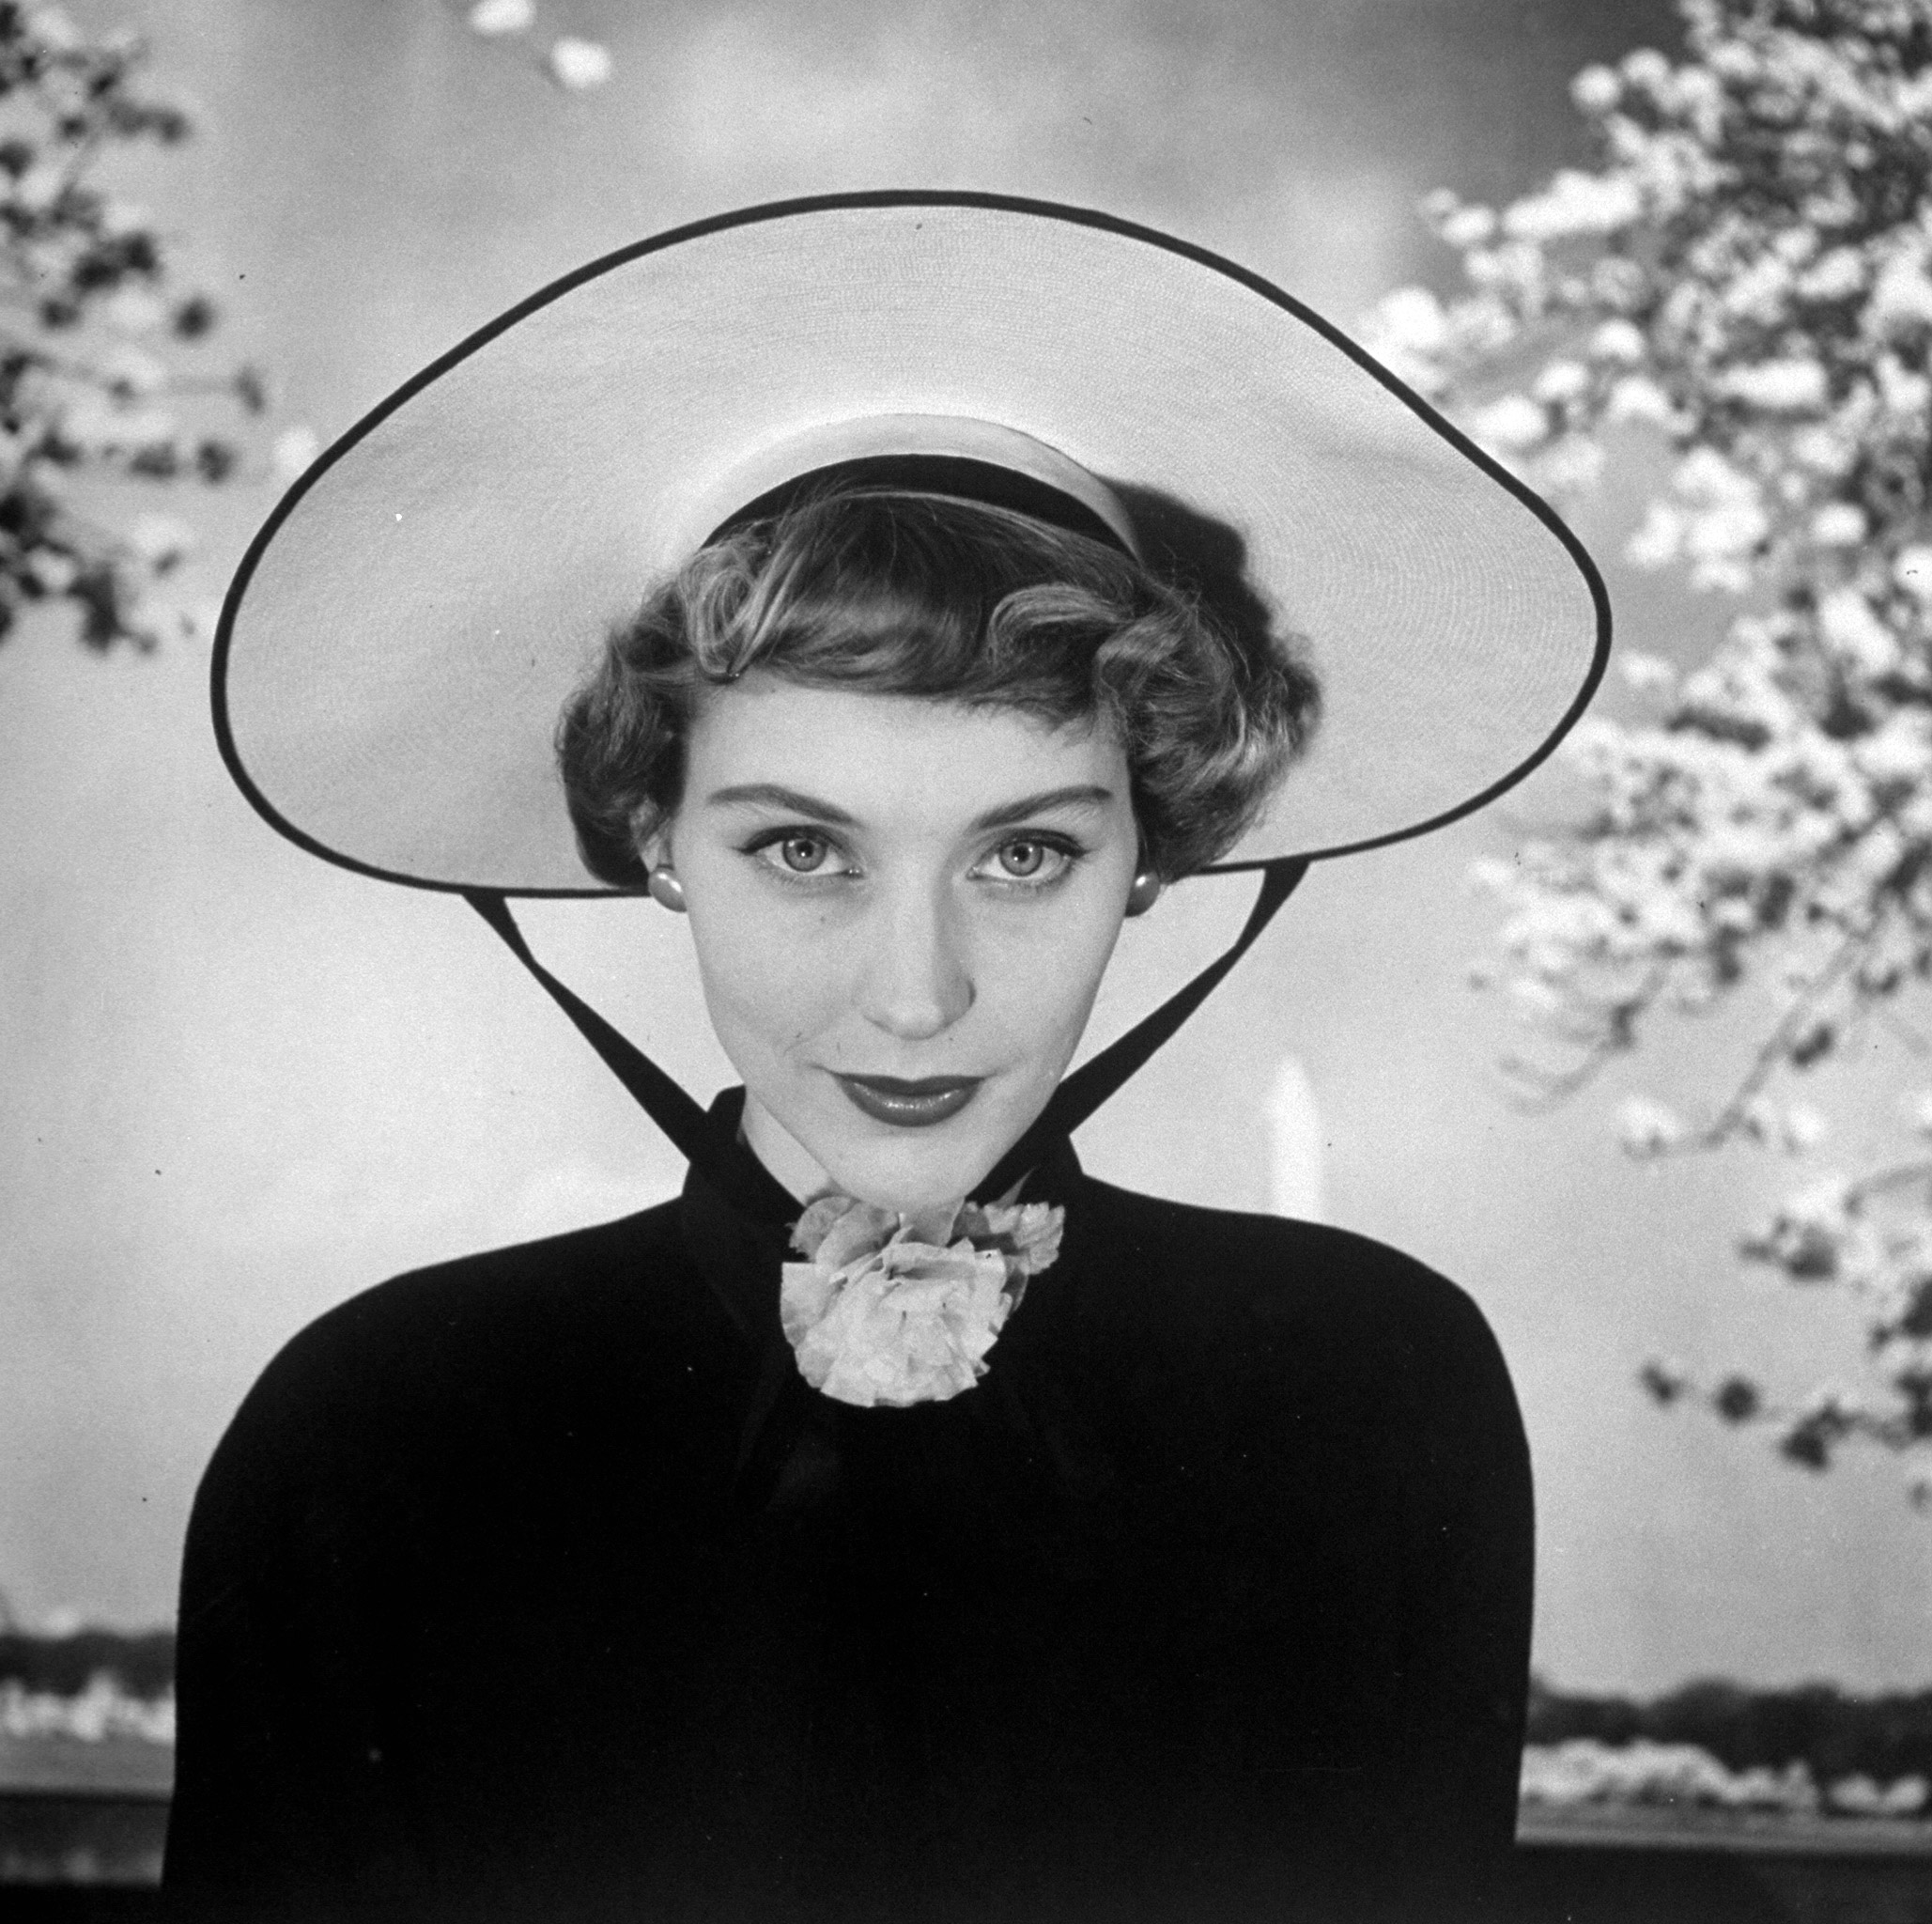 New french hat for spring. 1948.